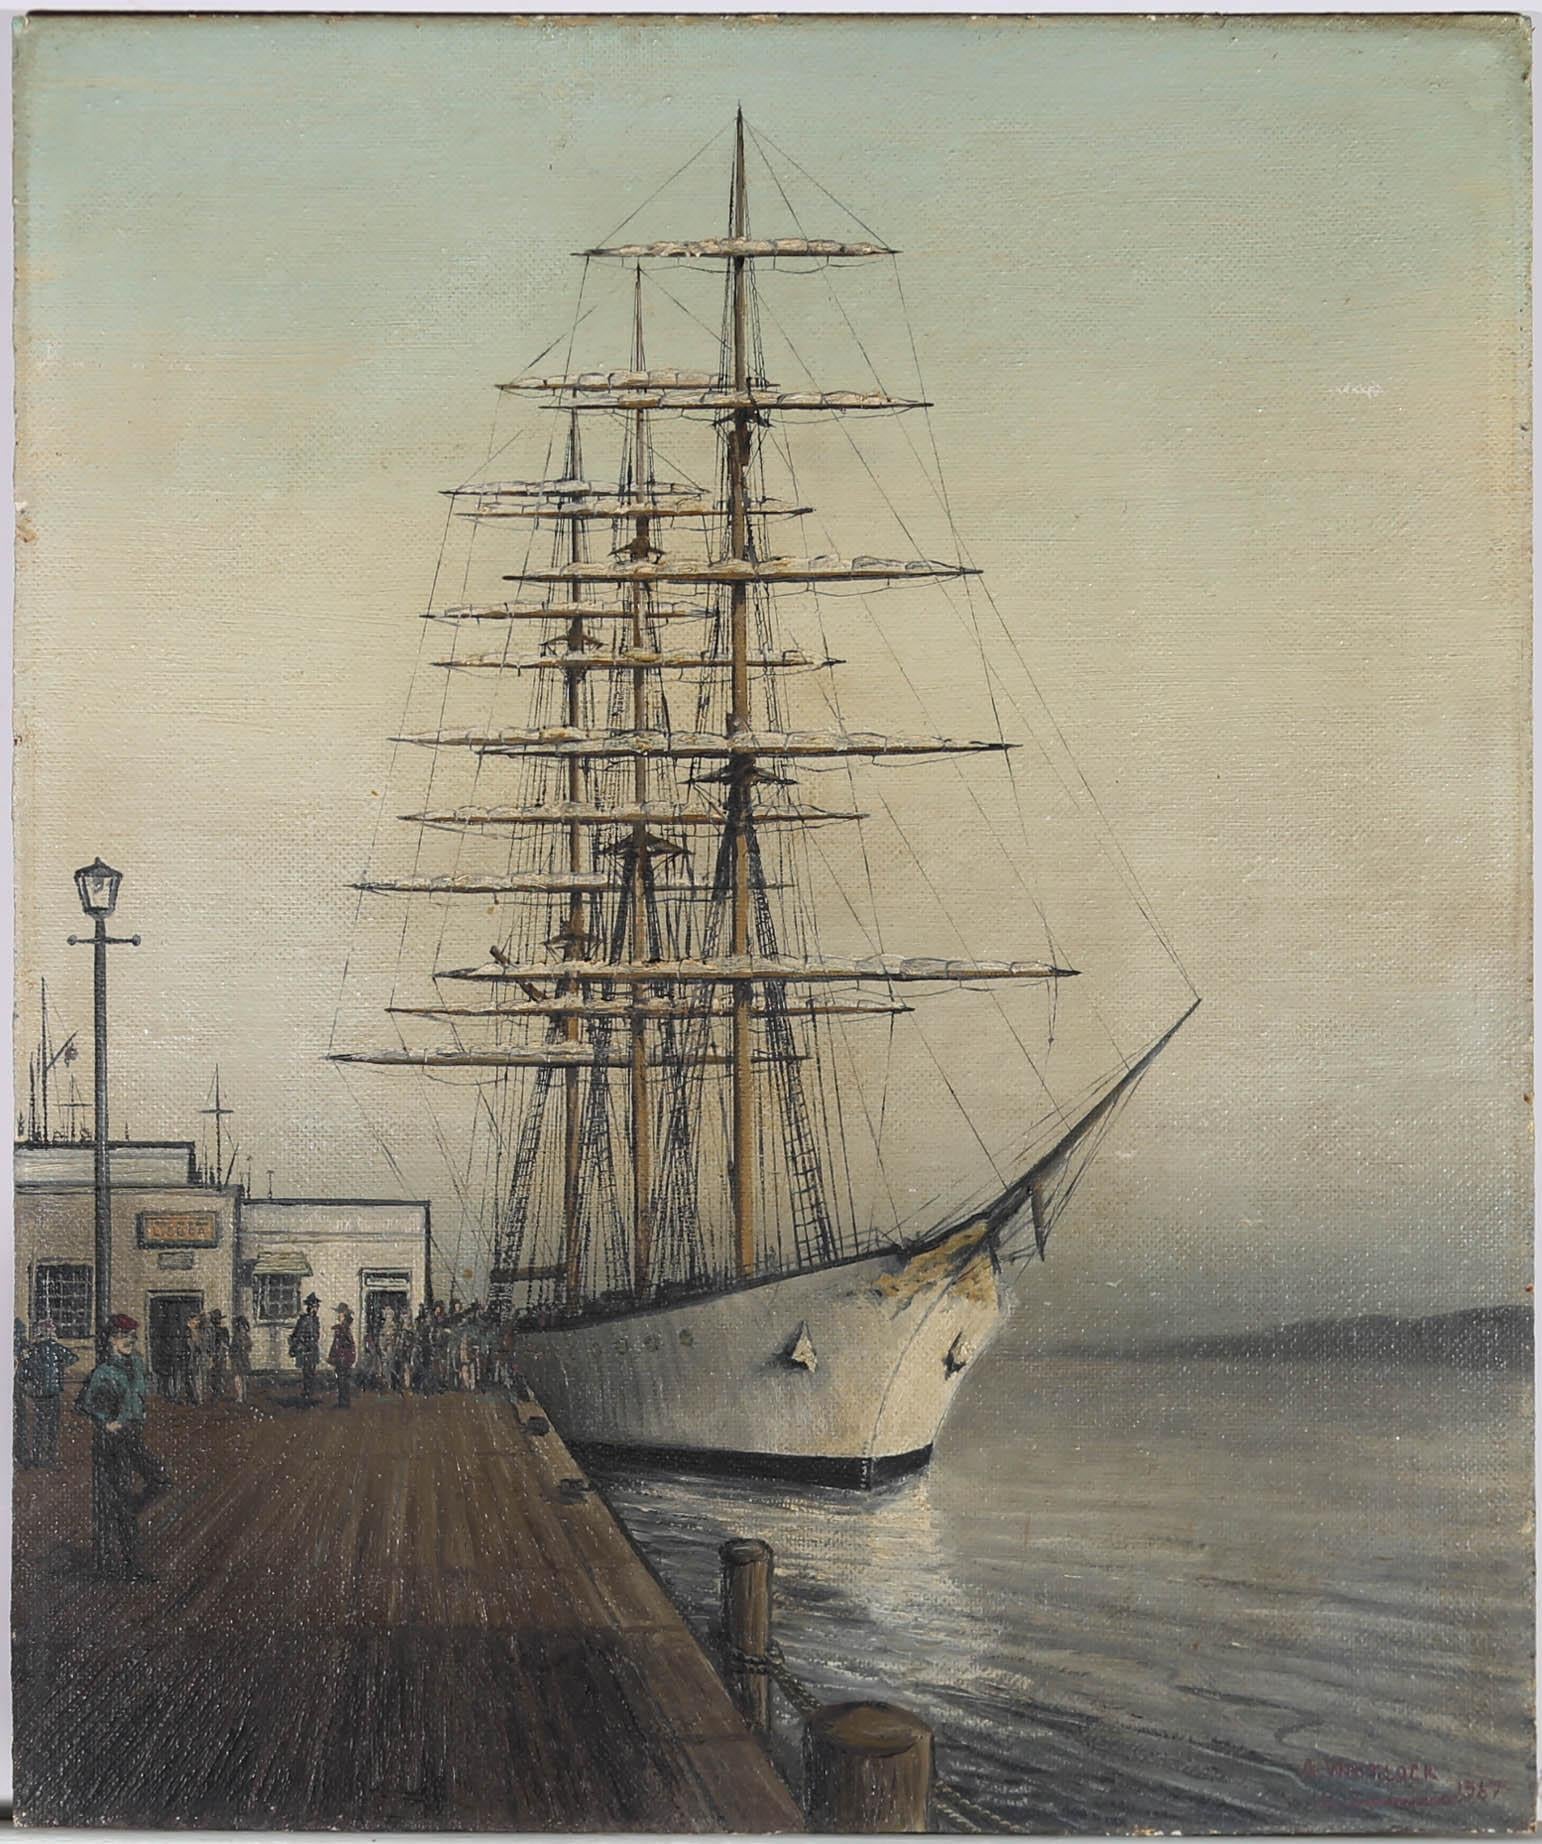 A fine nautical view of a tall ship, sails furled, waiting for passengers at a dock in Lisbon. The sign on the ticket office reads 